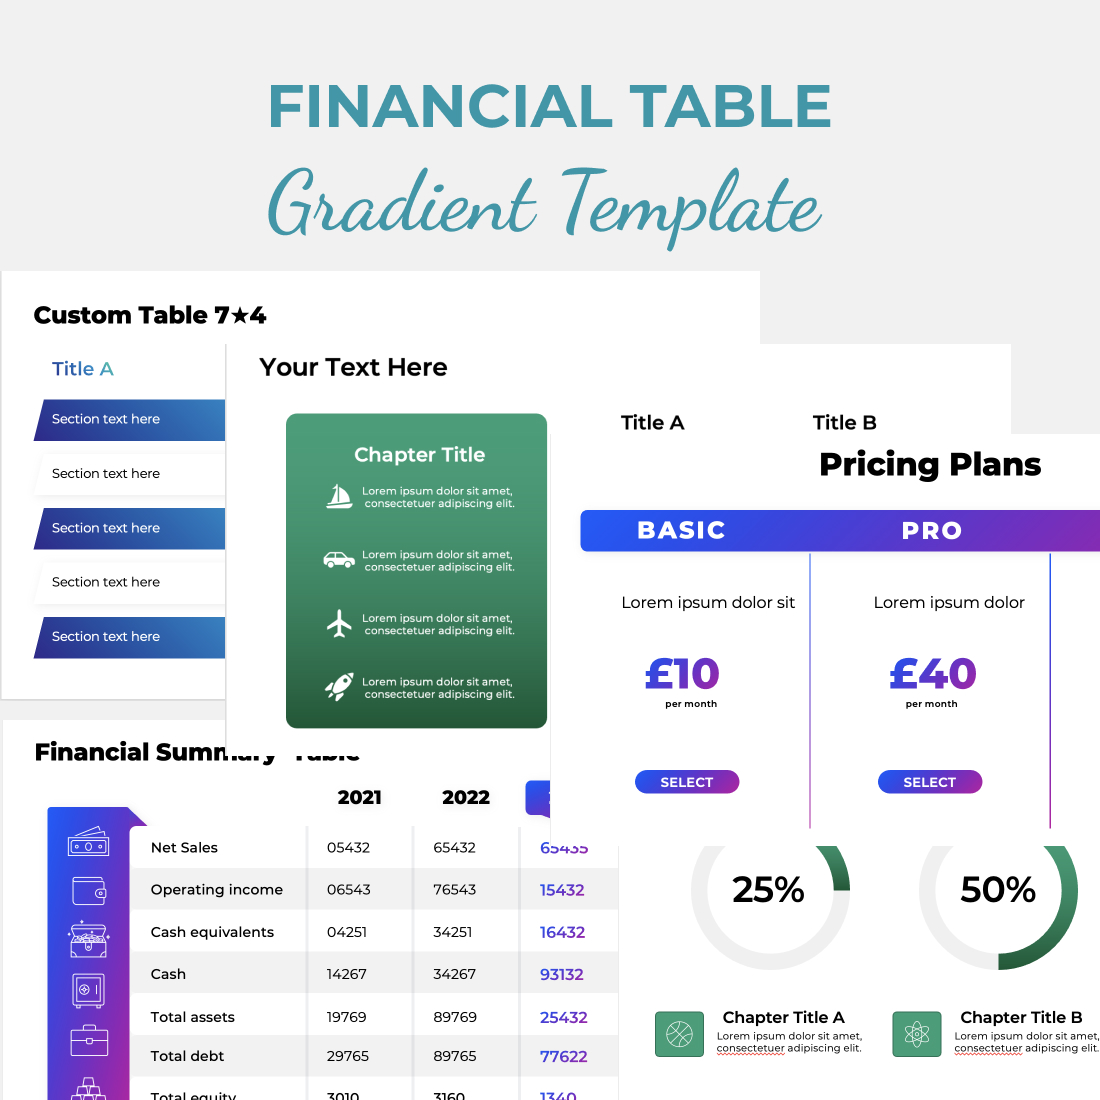 Financial Table Gradient Presentation cover image.